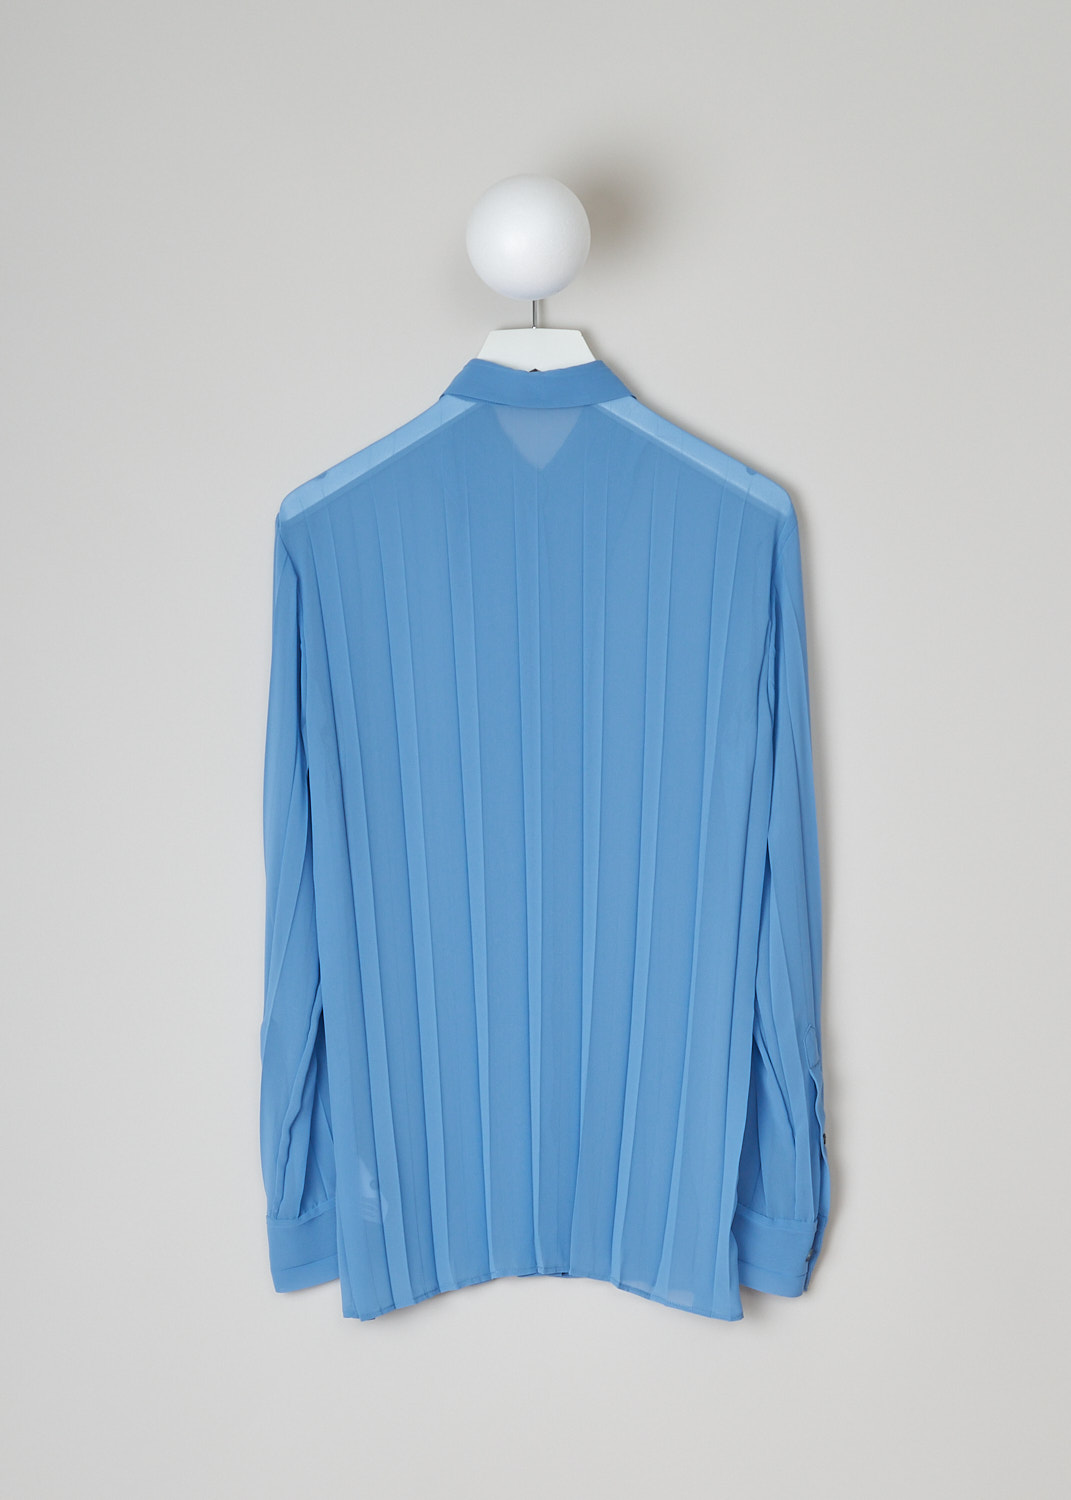 DRIES VAN NOTEN, SKY BLUE PLEATED CLAVELLY BLOUSE, CLAVELLY_PLEATS_6265_WW_SHIRT_SKY, Blue,  Back, This sky blue semi sheer Clavelly blouse is fully pleated. The blouse has a spread collar and a front button closure. The long sleeves have buttoned cuffs.   
